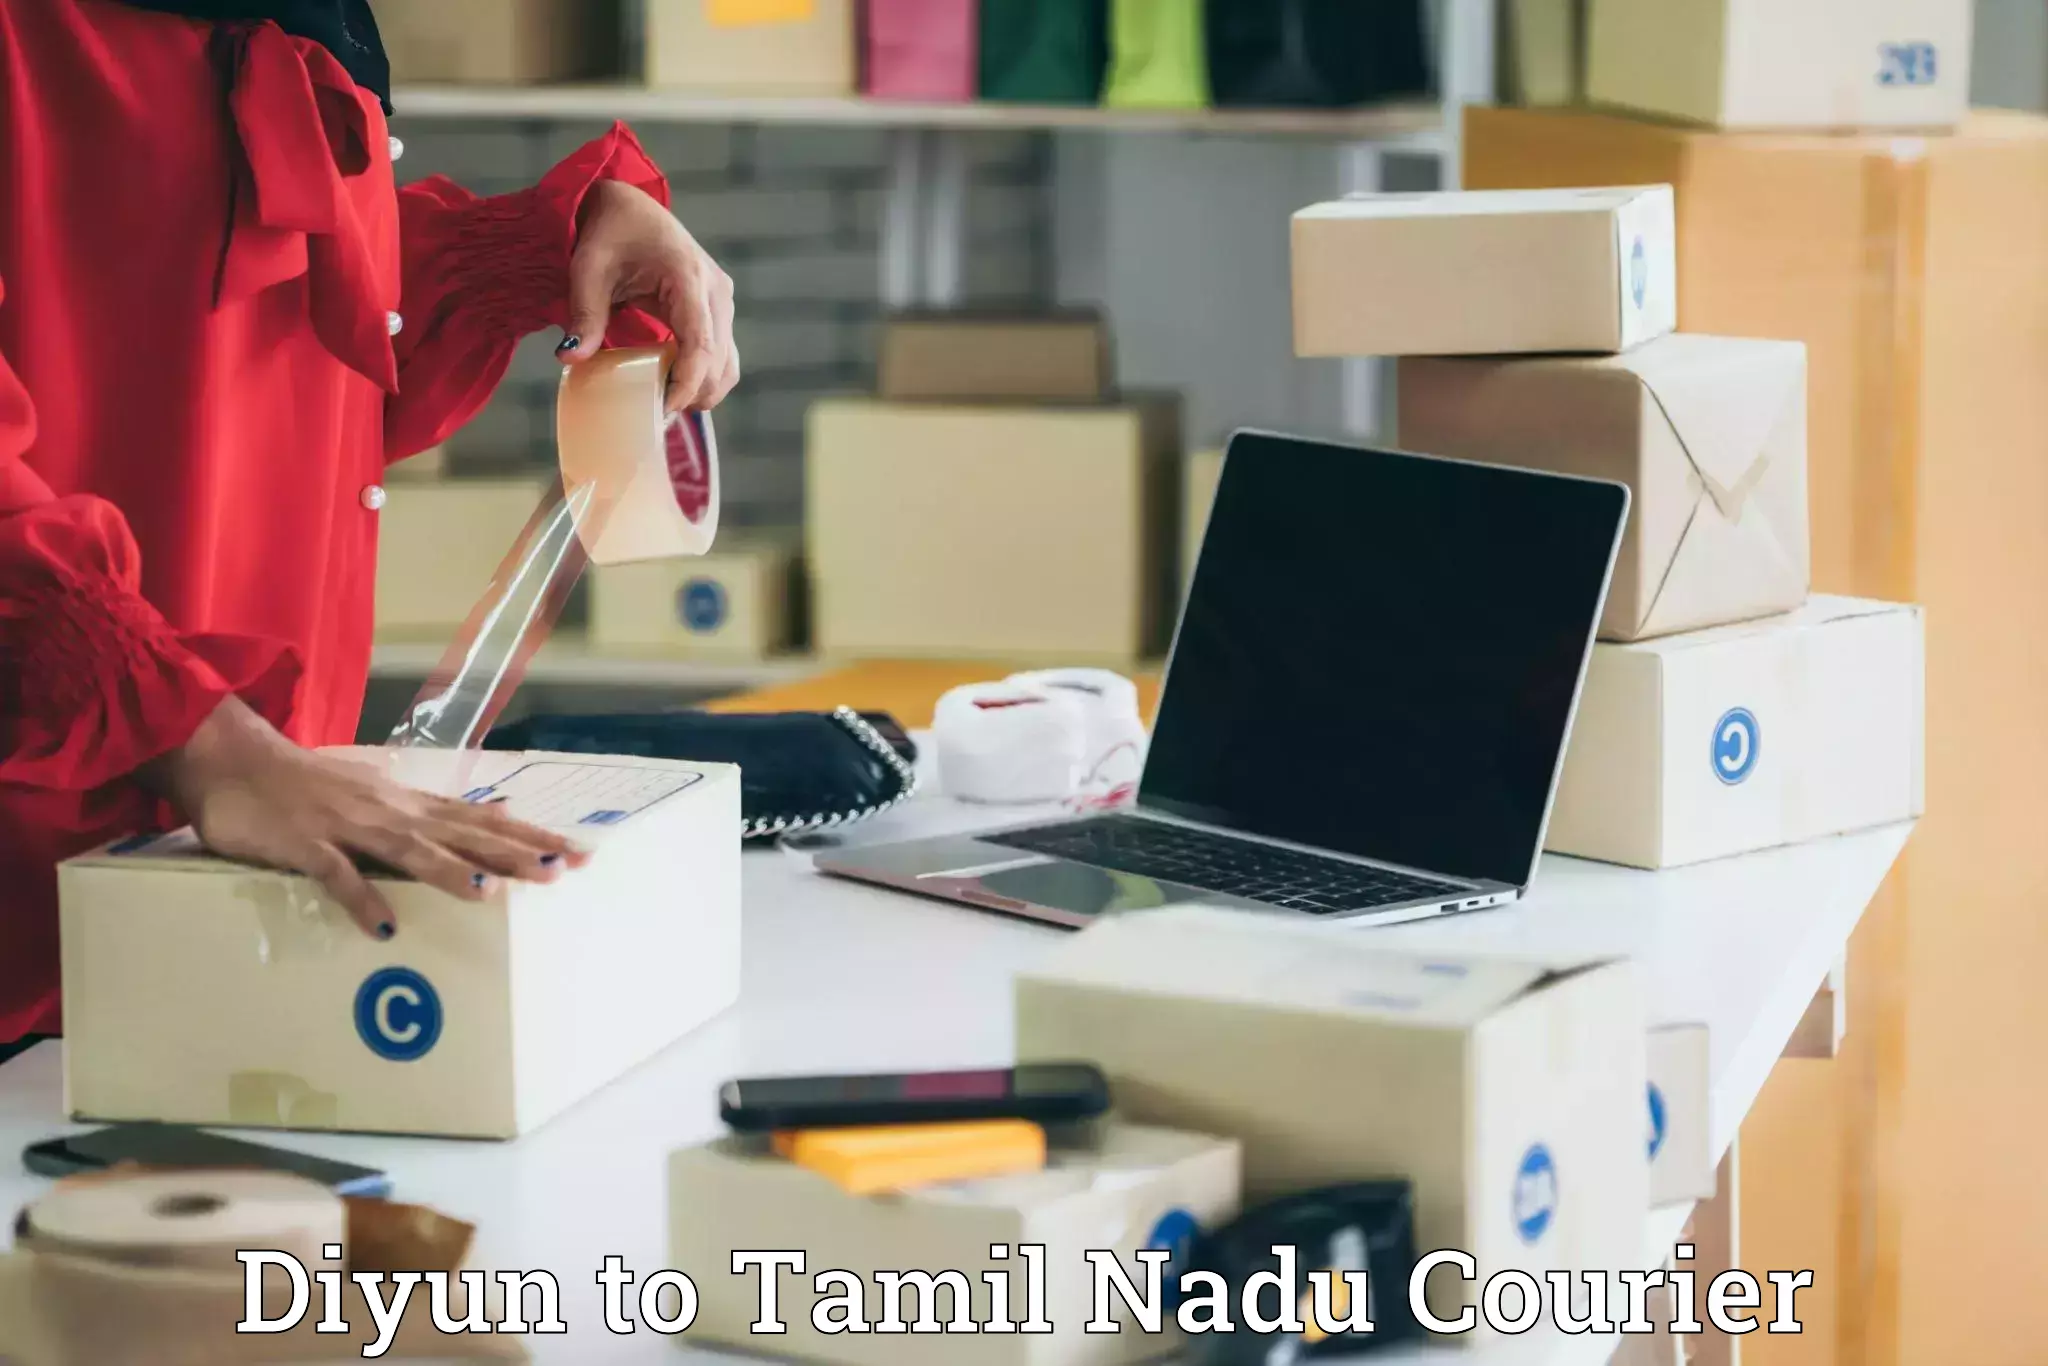 Airport luggage delivery Diyun to Tamil Nadu